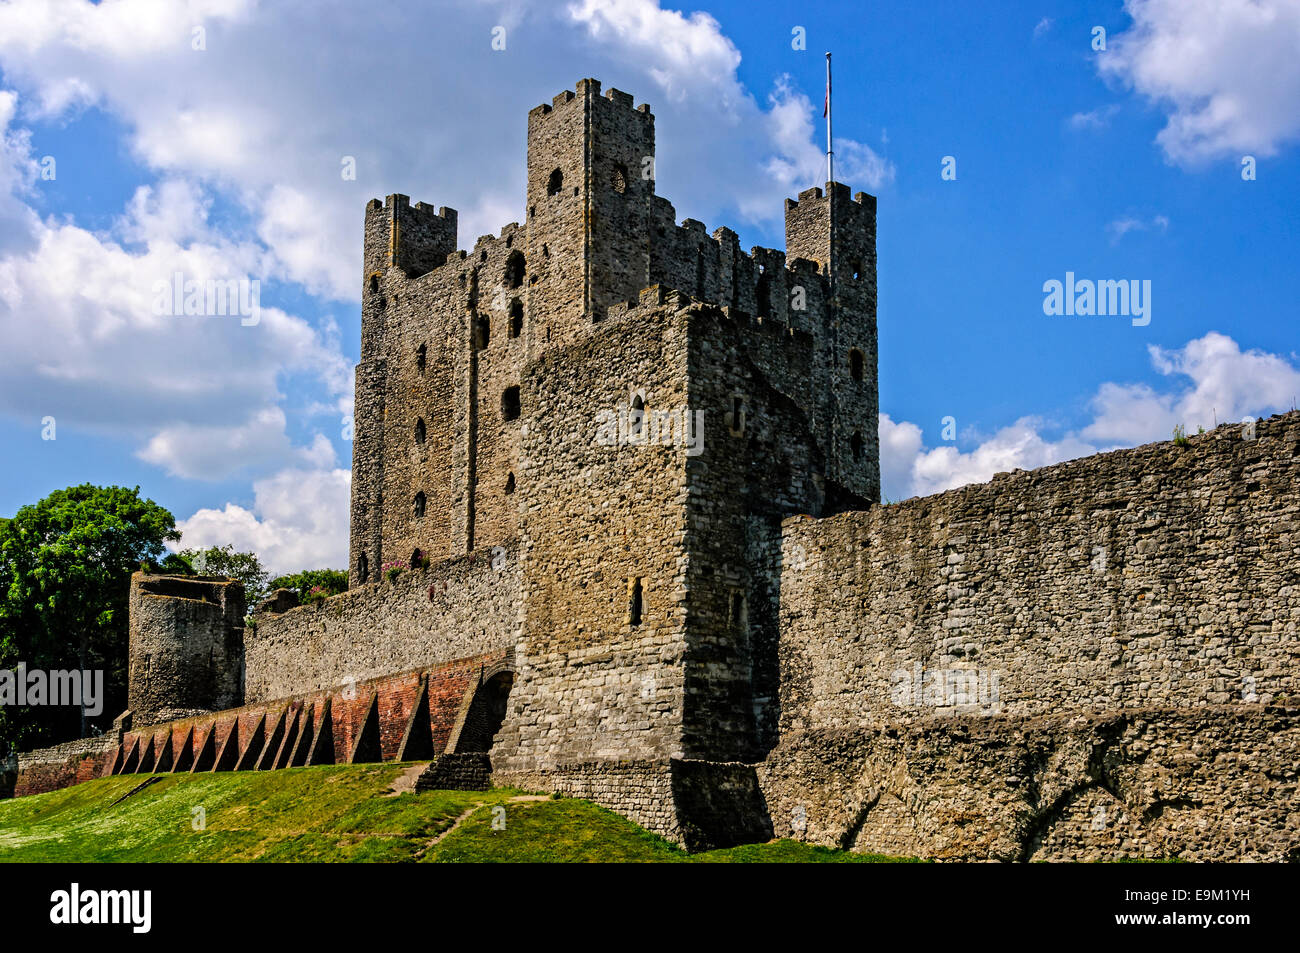 The dominant Kentish ragstone keep of Rochester castle protected by a curtain wall, a rectangular tower and a circular tower. Stock Photo